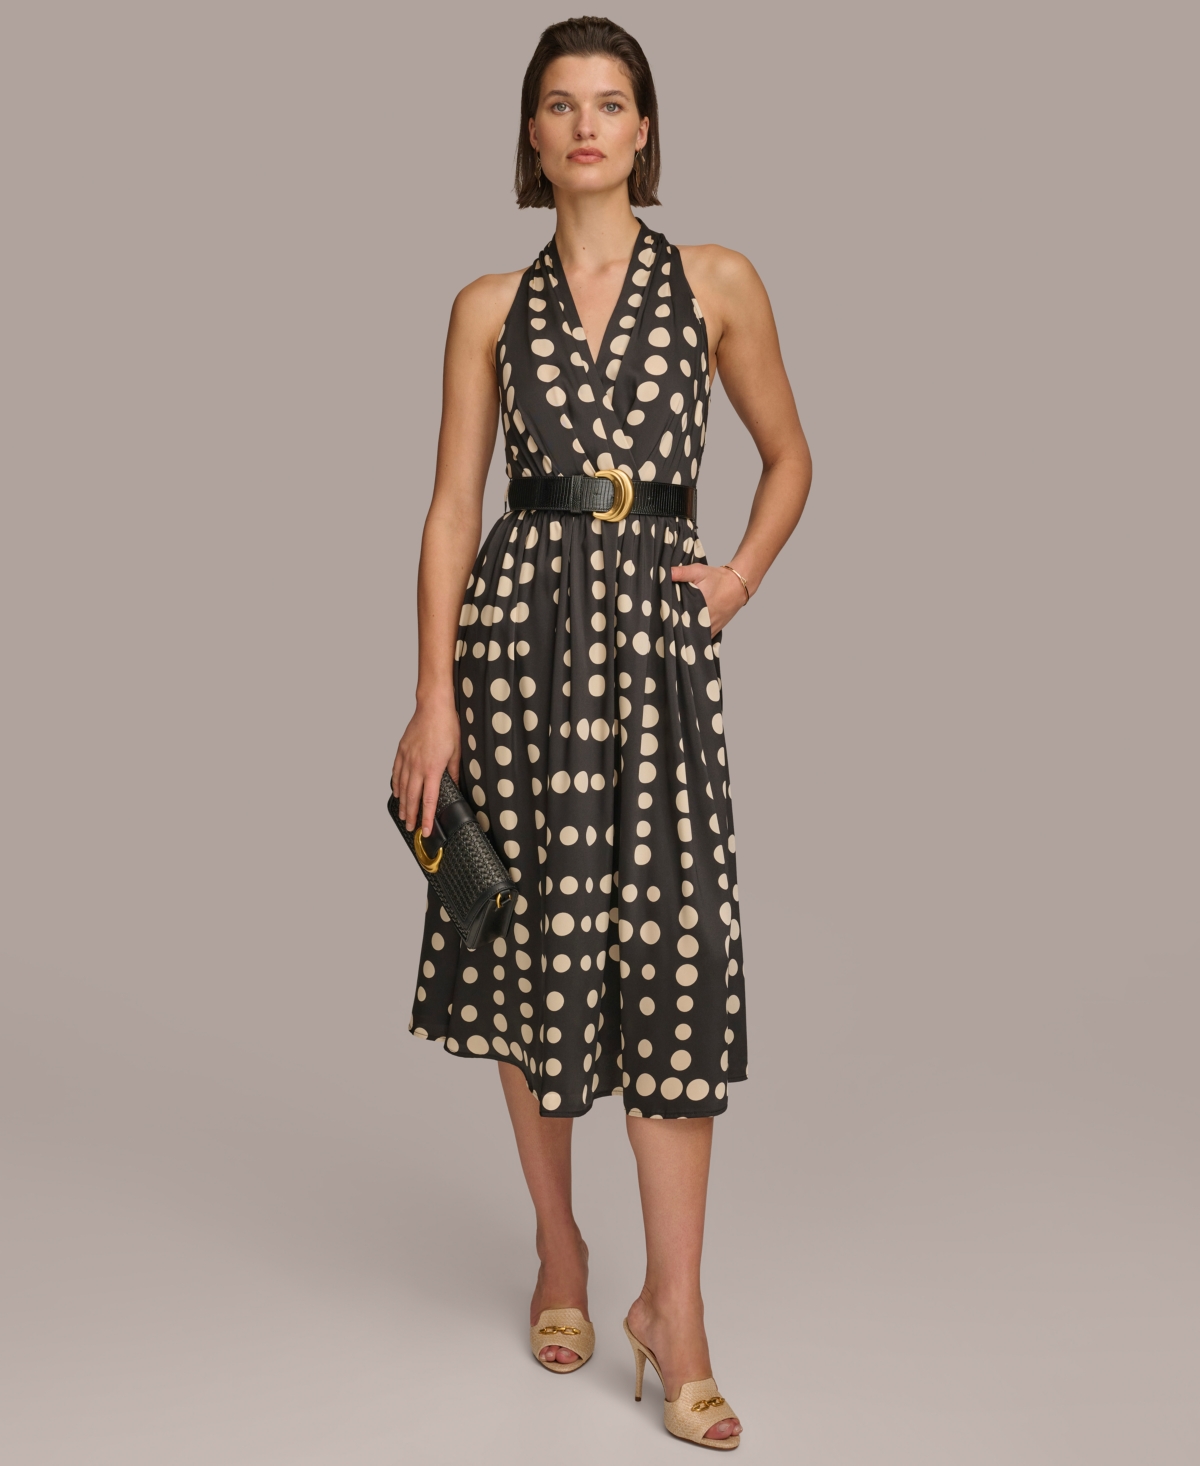 Women's Printed Belted A-Line Dress - Black Canvas